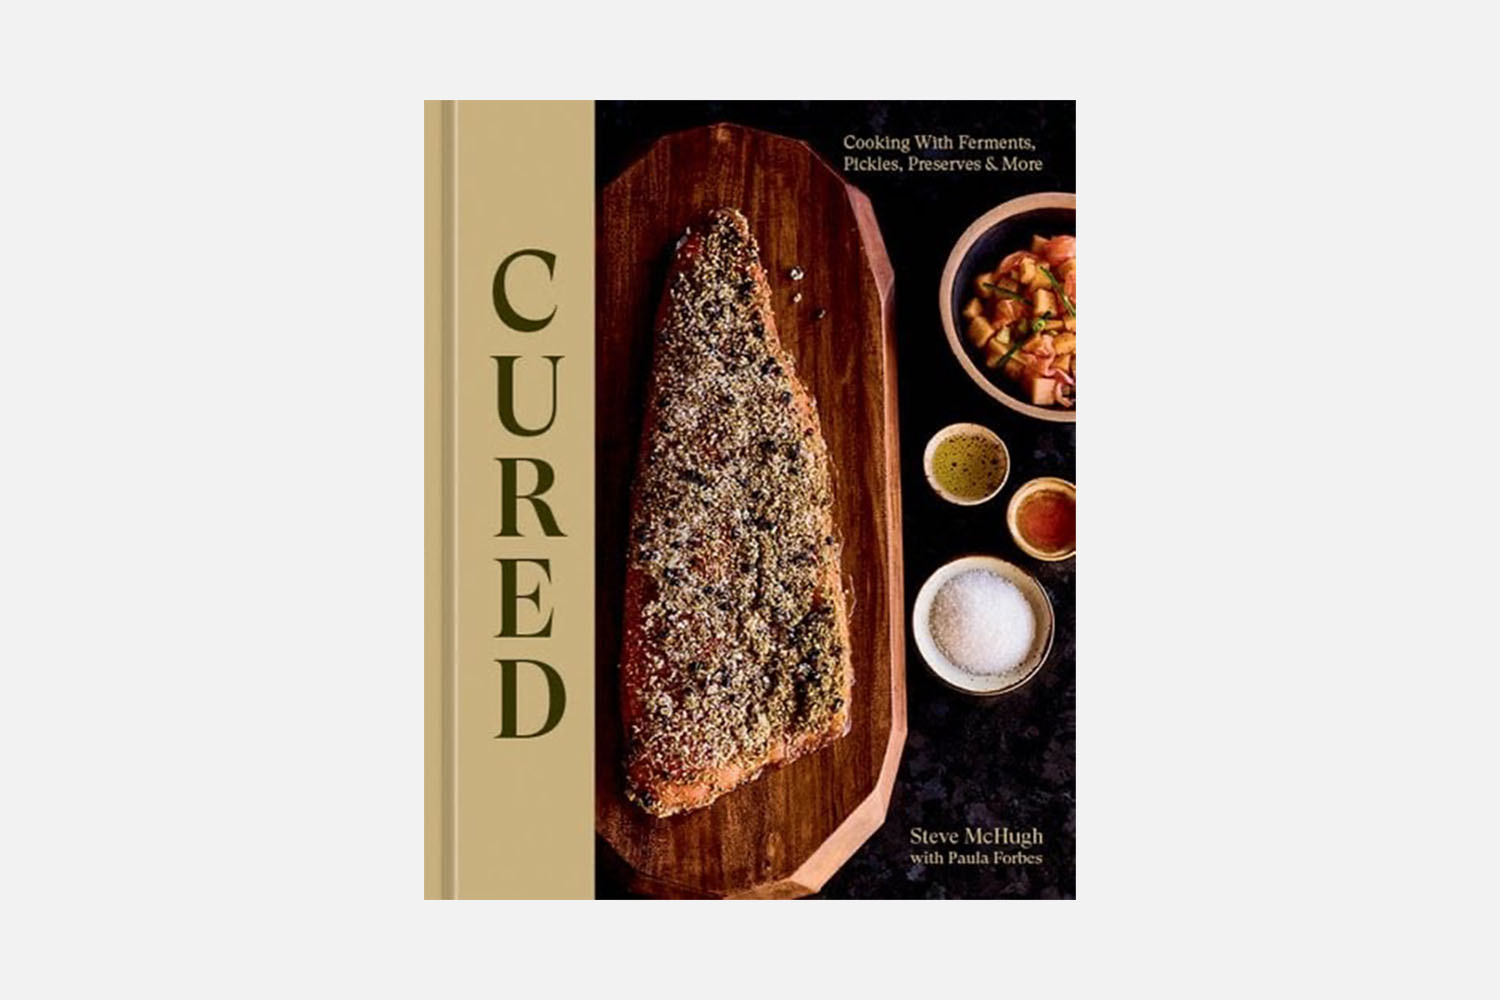 Cured: Cooking with Ferments, Pickles, Preserves & More by Steve McHugh